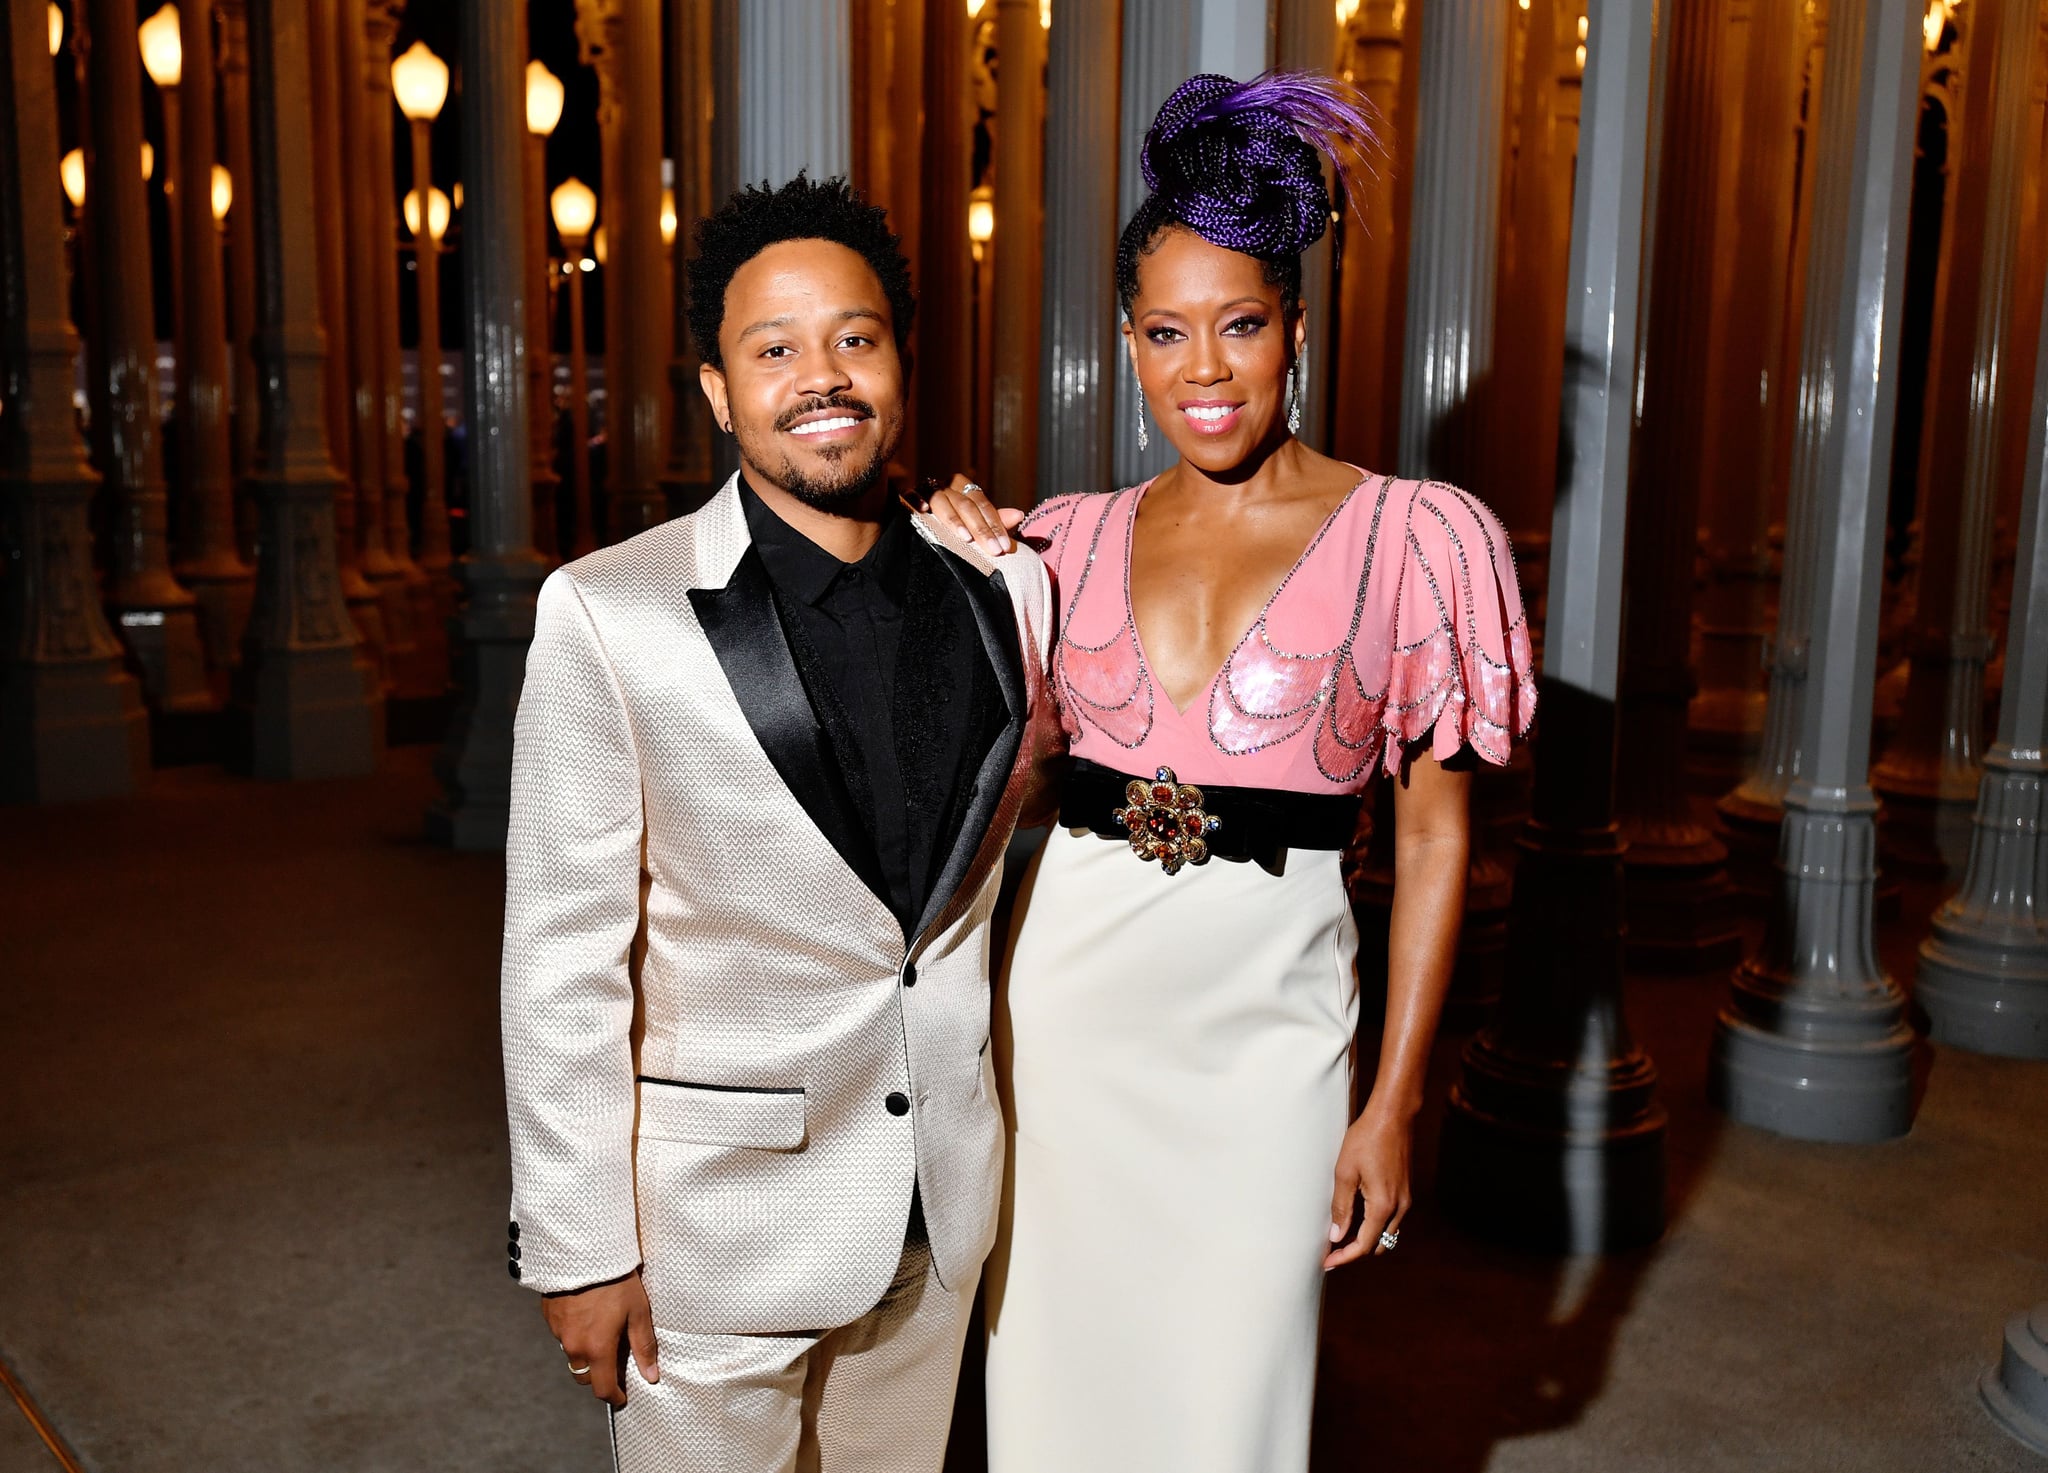 LOS ANGELES, CALIFORNIA - NOVEMBER 02: (L-R) Ian Alexander Jr. and Regina King, wearing Gucci, attend the 2019 LACMA Art + Film Gala Presented By Gucci at LACMA on November 02, 2019 in Los Angeles, California. (Photo by Emma McIntyre/Getty Images for LACMA)